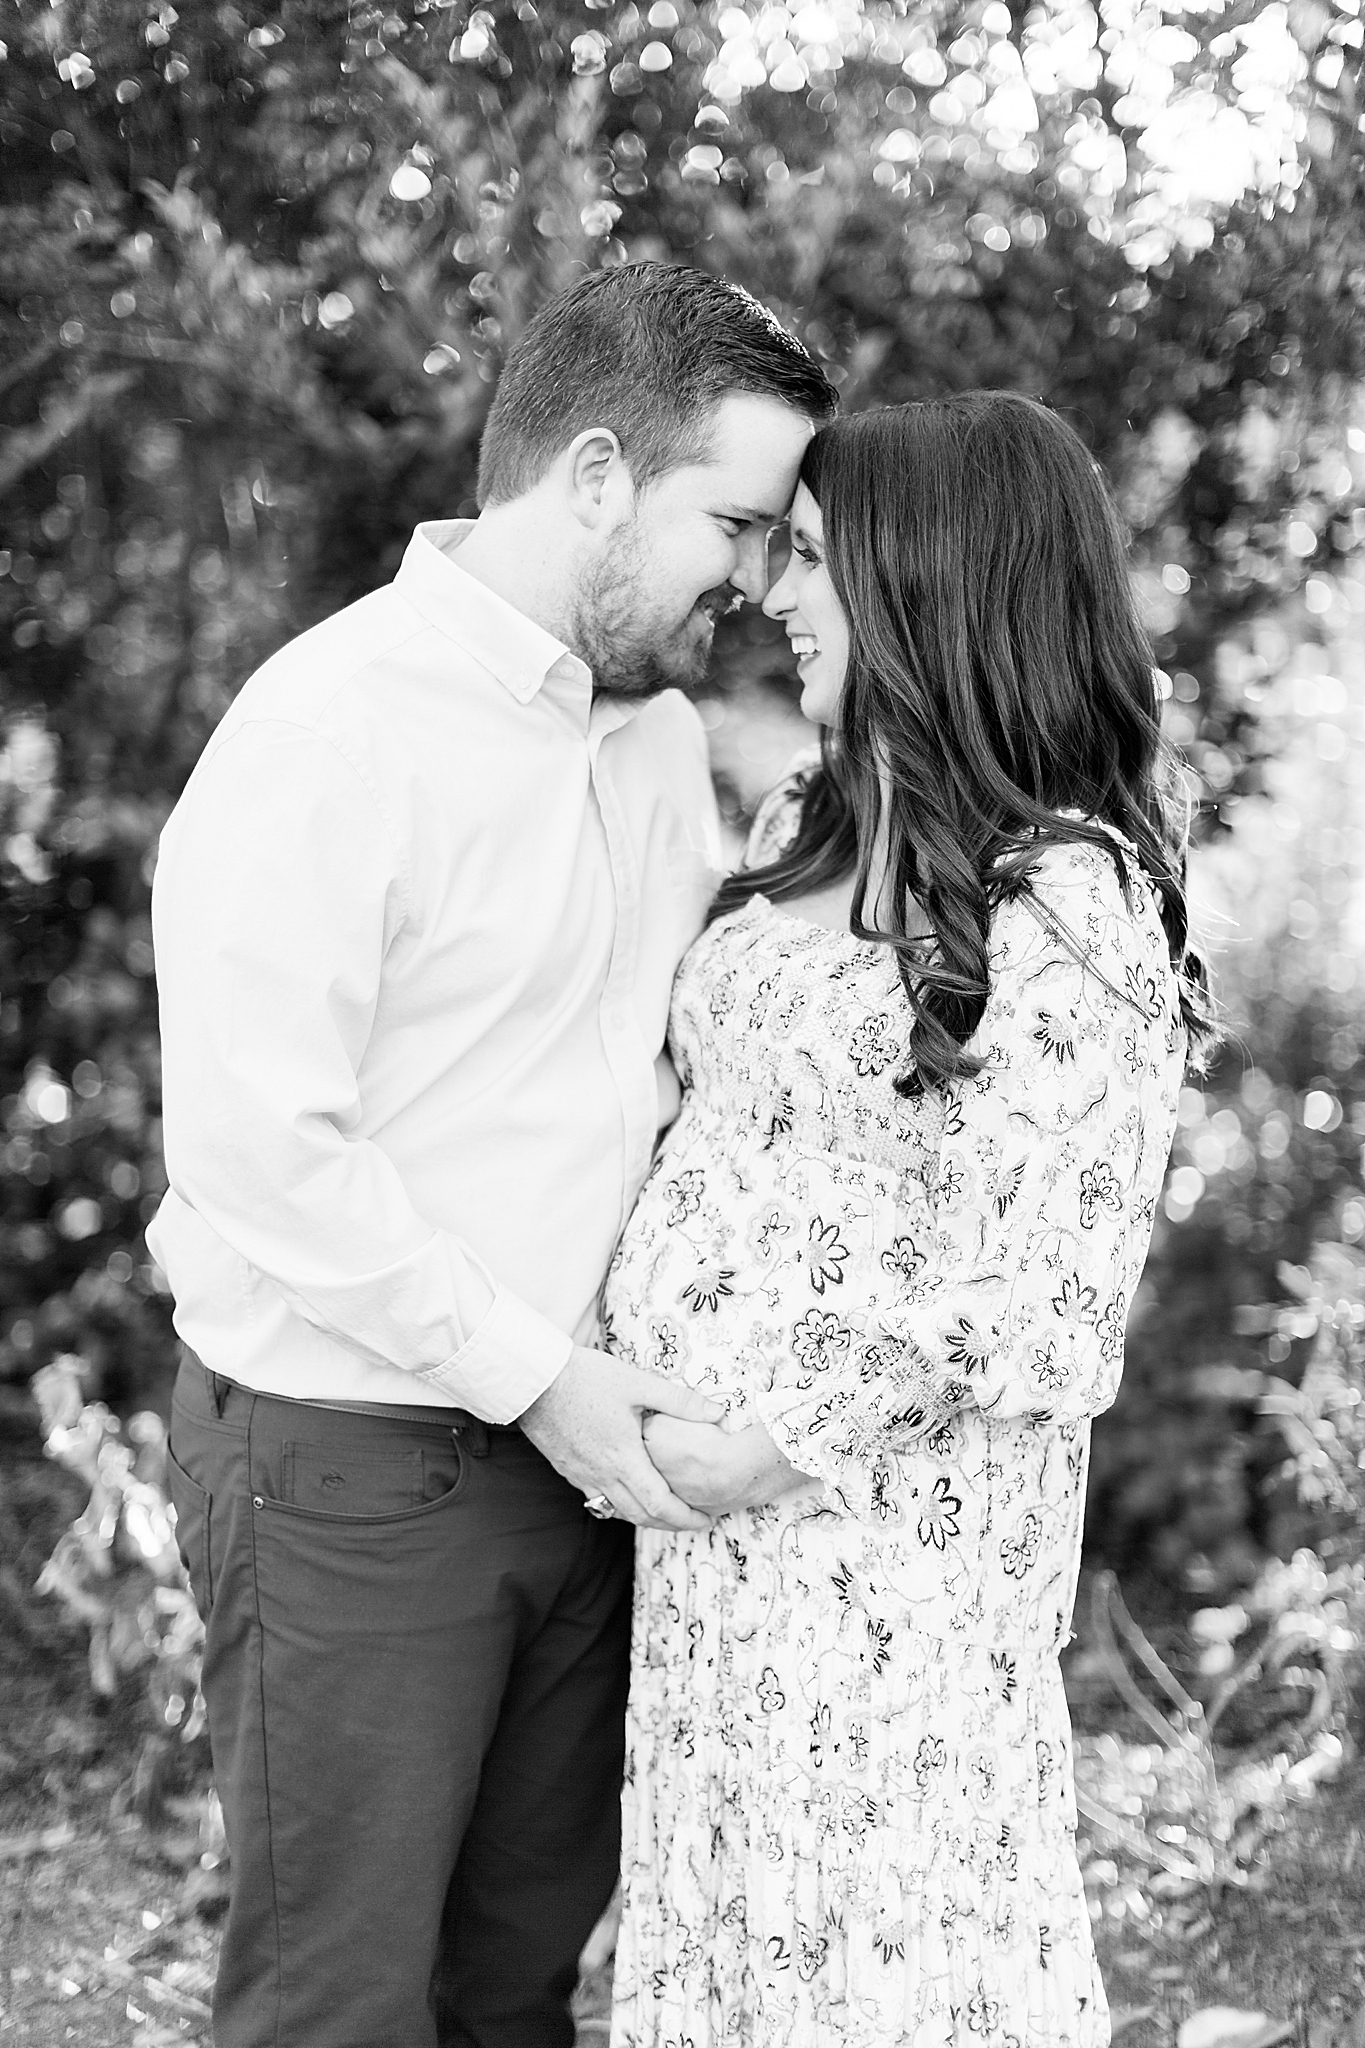 Reynolda Village maternity session with couple laughing together